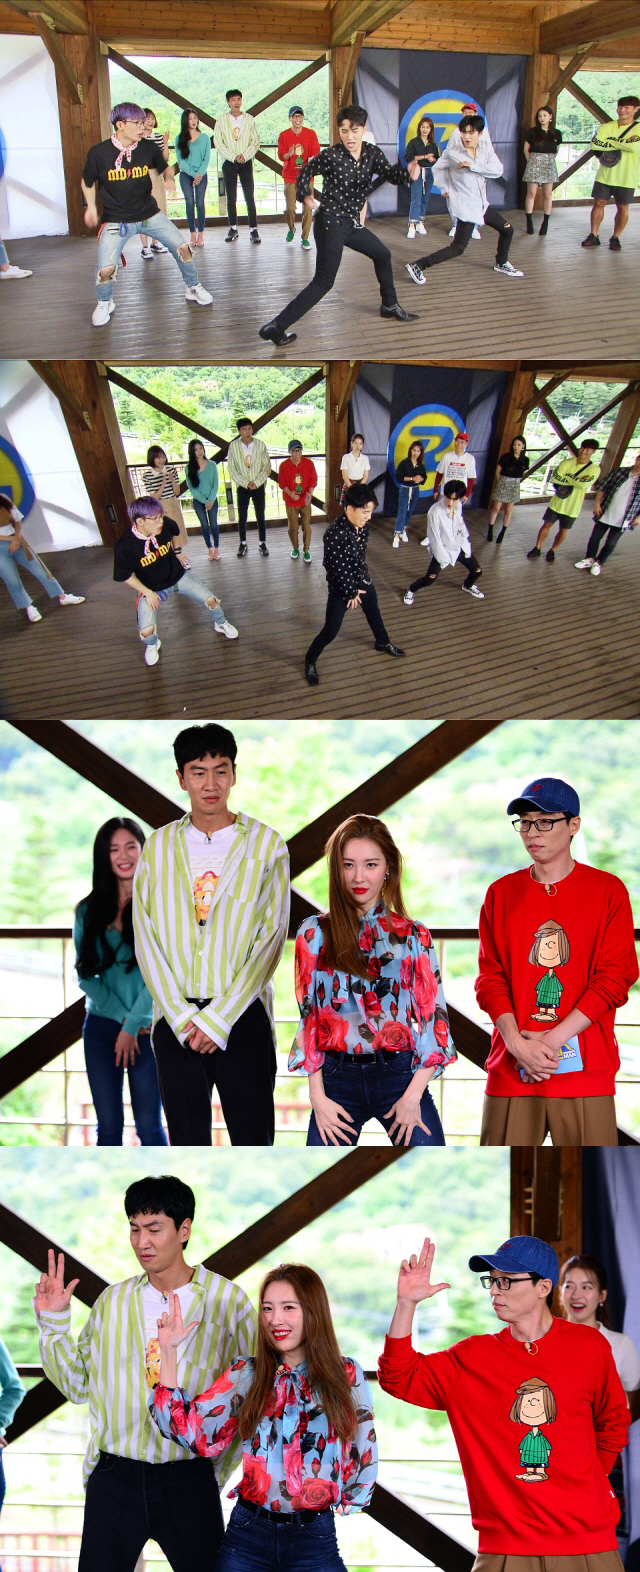 On SBS Running Man, which will be broadcast on September 2, a total of Super Wings will be held from the victory to the icon, Sunmi, Lee Elijah, Isia, Lee Joo-yeon and Kim Ji-min.Victory and Icon recently participated in the recording of Running Man and performed Im Going to Die choreography during the opening talk.Victory in the center surprised everyone by radiating fantasy chemistry with unexpected swordsmanship.Jill Sera Sunmi, Yoo Jae-Suk and Lee Kwang-soo showed off the stage of Gashina collaver of unconventional choreography, which once again made the atmosphere of the scene warm.On the other hand, on the same day, Running Man, the Big Bang big bang victory, which became an issue only with the release of the lineup, Bobby of the sound source gangster icon, Bee, emerging actress Lee Elijah, Isia, Lee Joo-yeon, followed by the next generation sexy diva Sunmi and beauty gag woman Kim Ji-min The Yings opened a pleasant race.Running Man, which is decorated with couple races with colorful guests, will be broadcast at 4:50 pm on September 2.